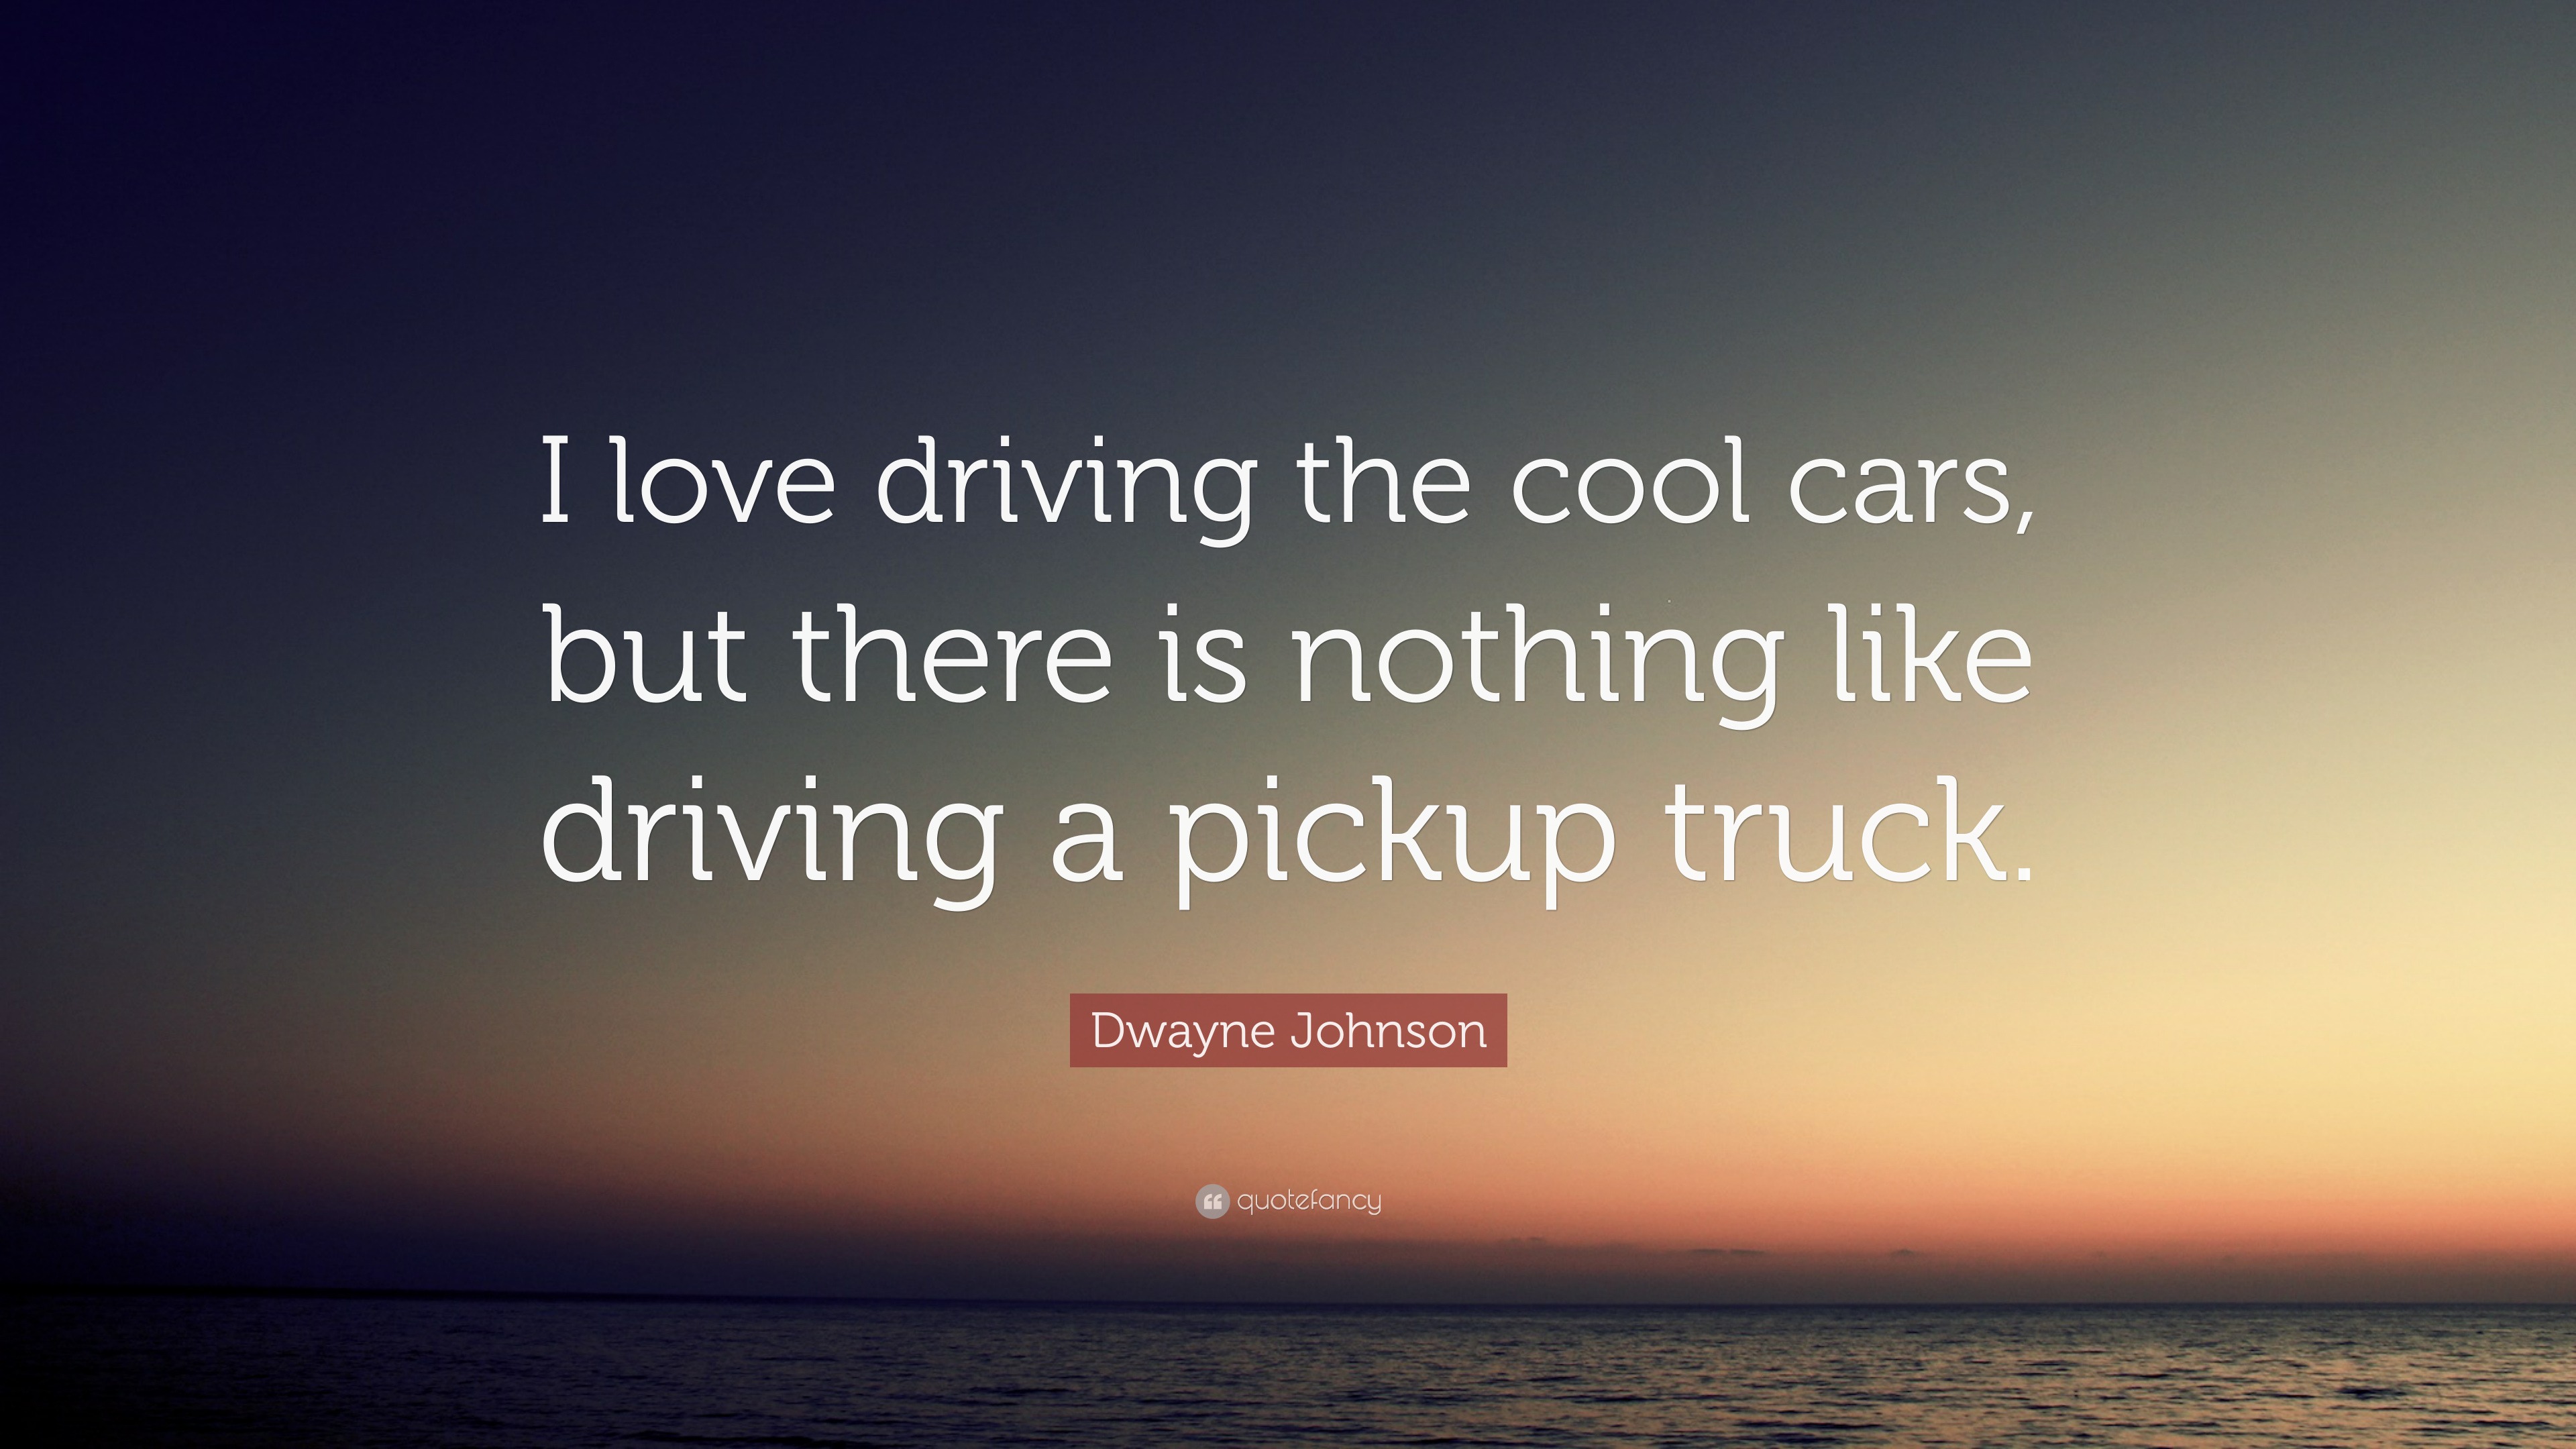 Dwayne Johnson Quote “I love driving the cool cars but there is nothing